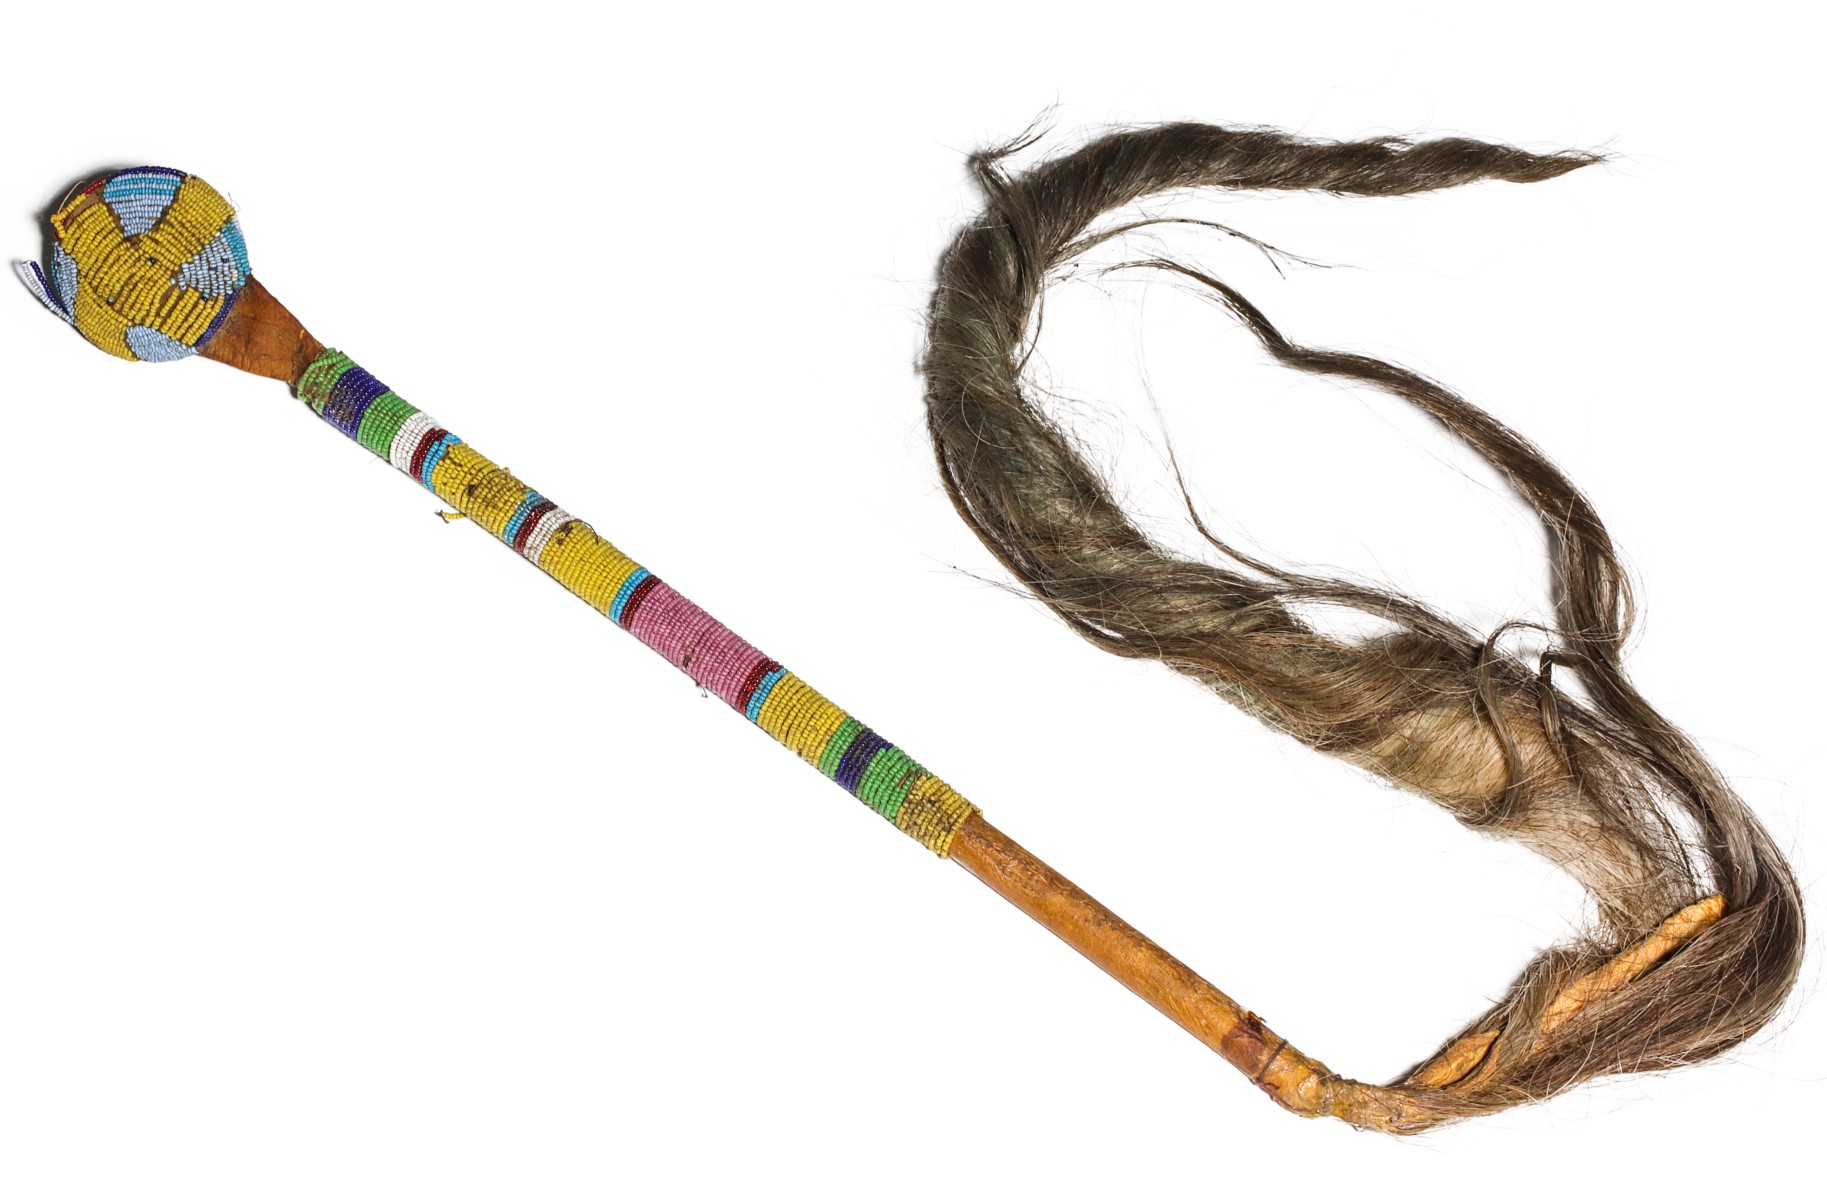 A NORTHERN PLAINS INDIAN BEADED CLUB OR DANCE WAND